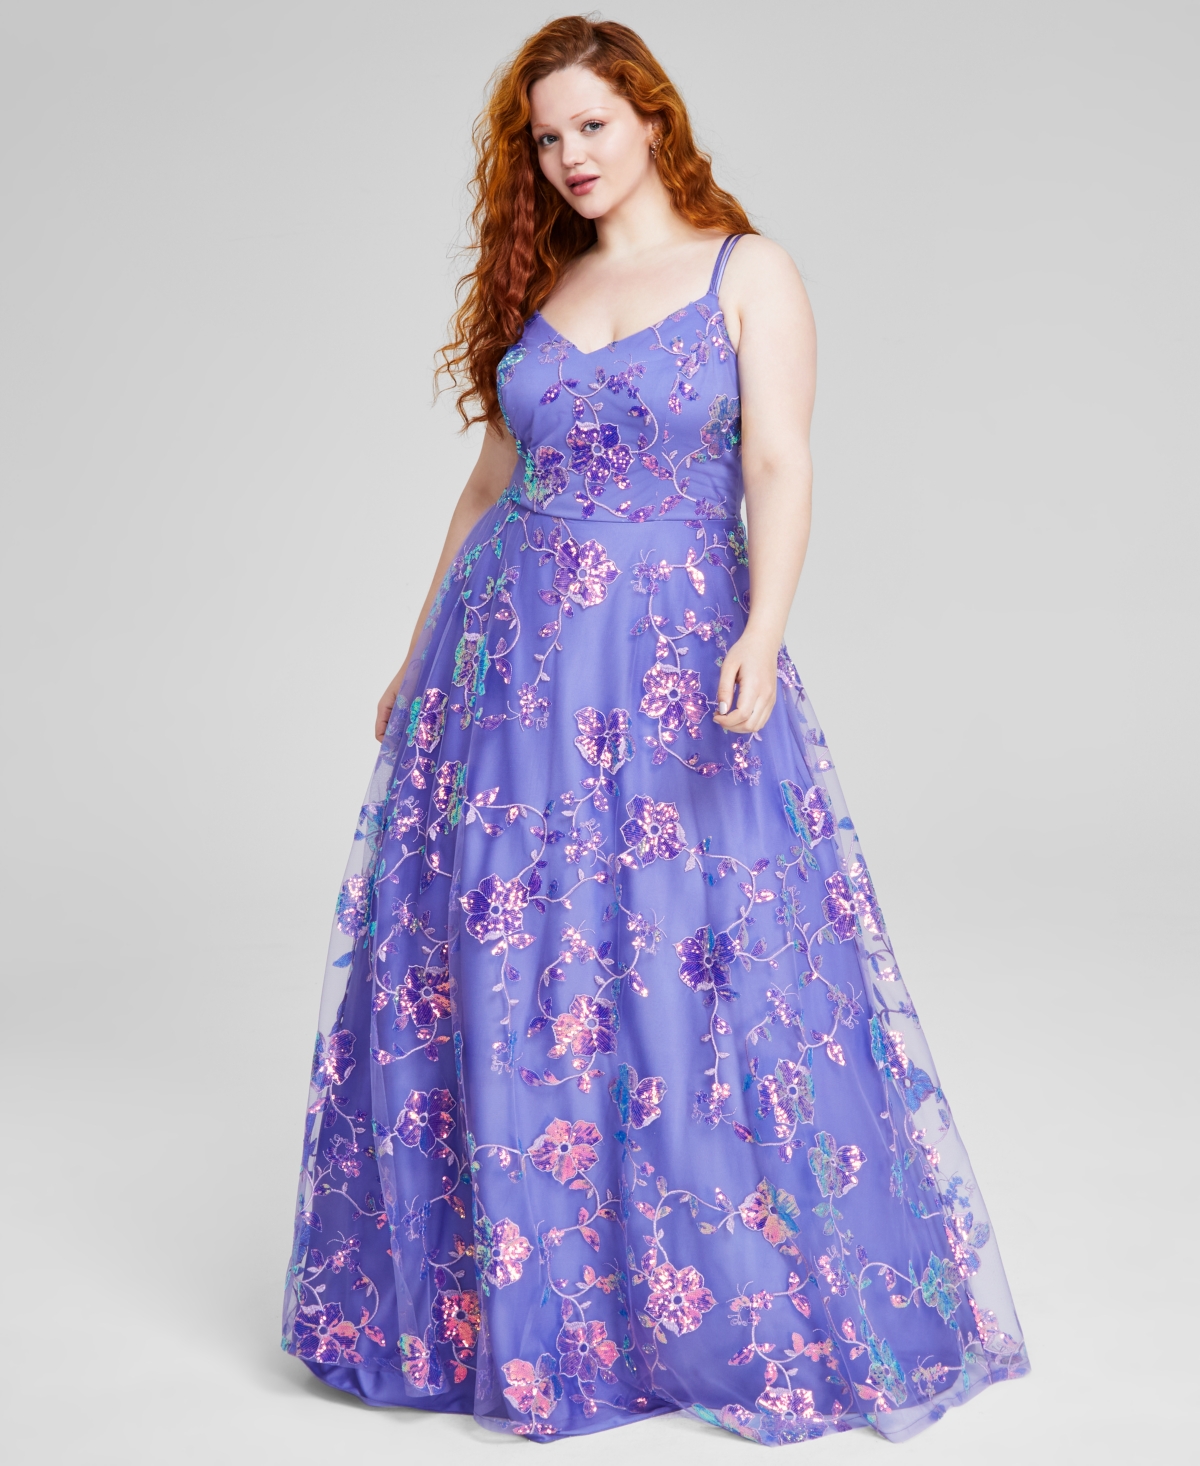 Trendy Plus Size Sequined Embroidered Ball Gown, Created for Macy's - Lavender